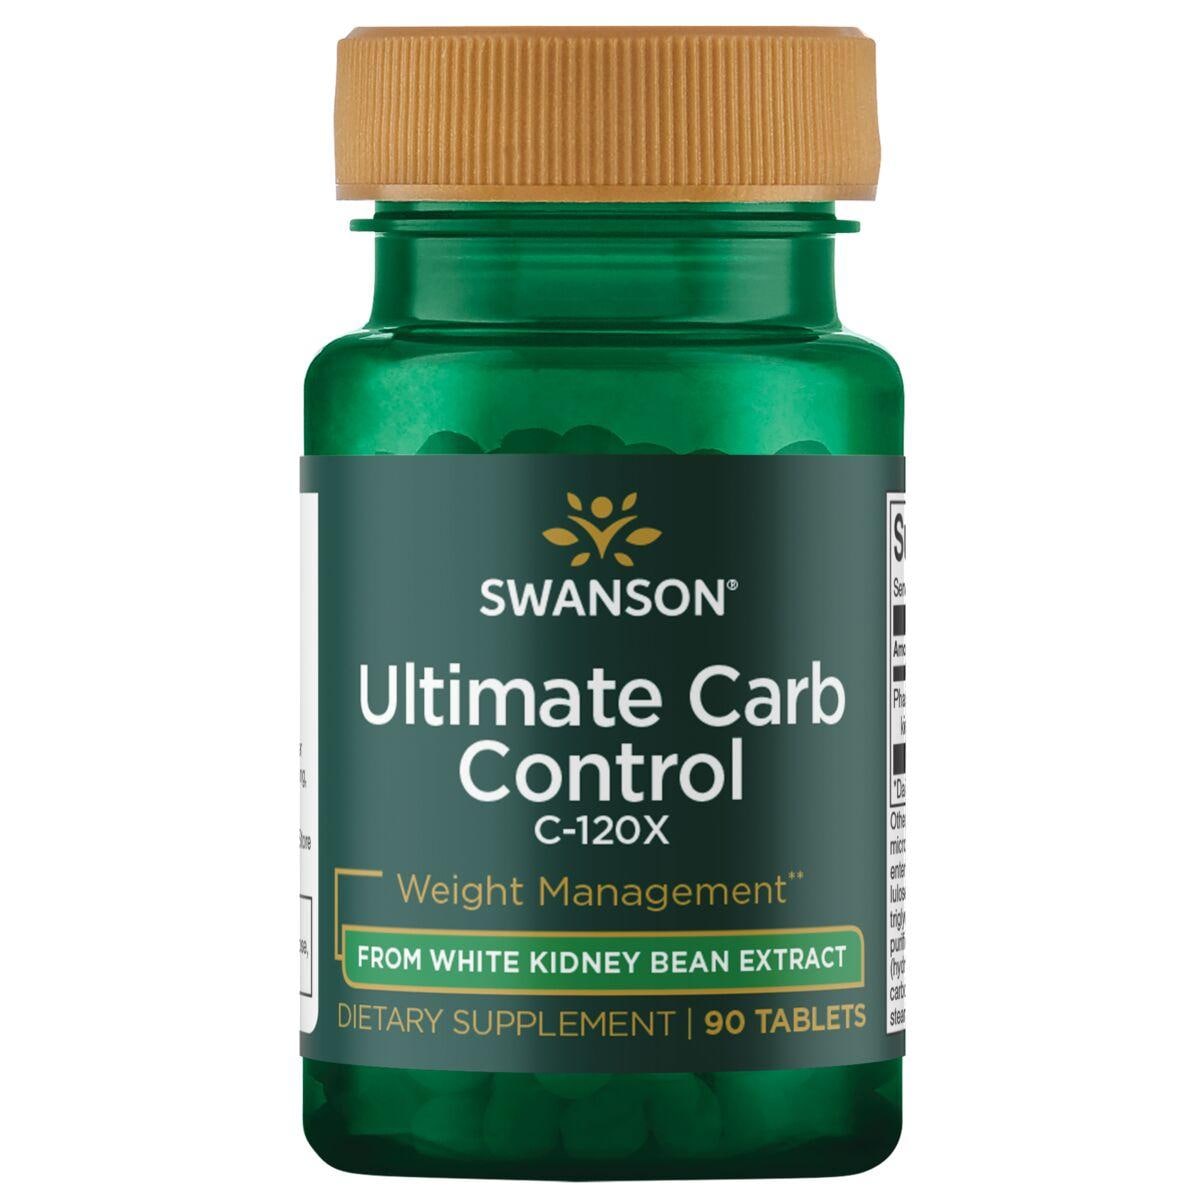 Swanson Ultra Ultimate Carb Control C-120X from White Kidney Bean Extract Supplement Vitamin | 2 mg | 90 Tabs